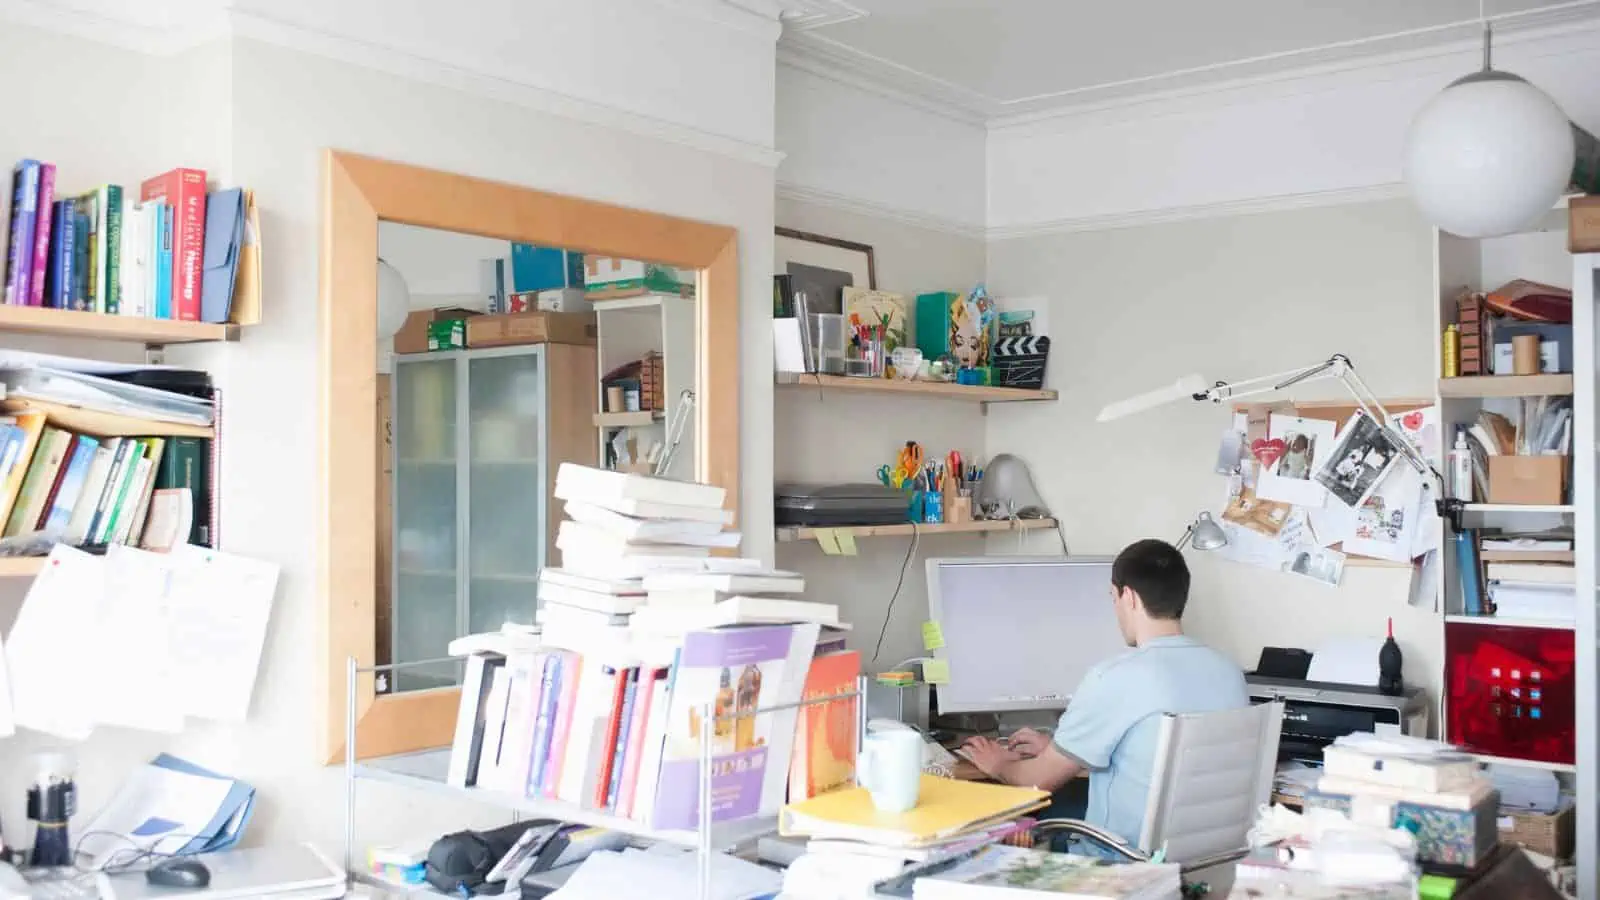 man working at computer in cluttered office